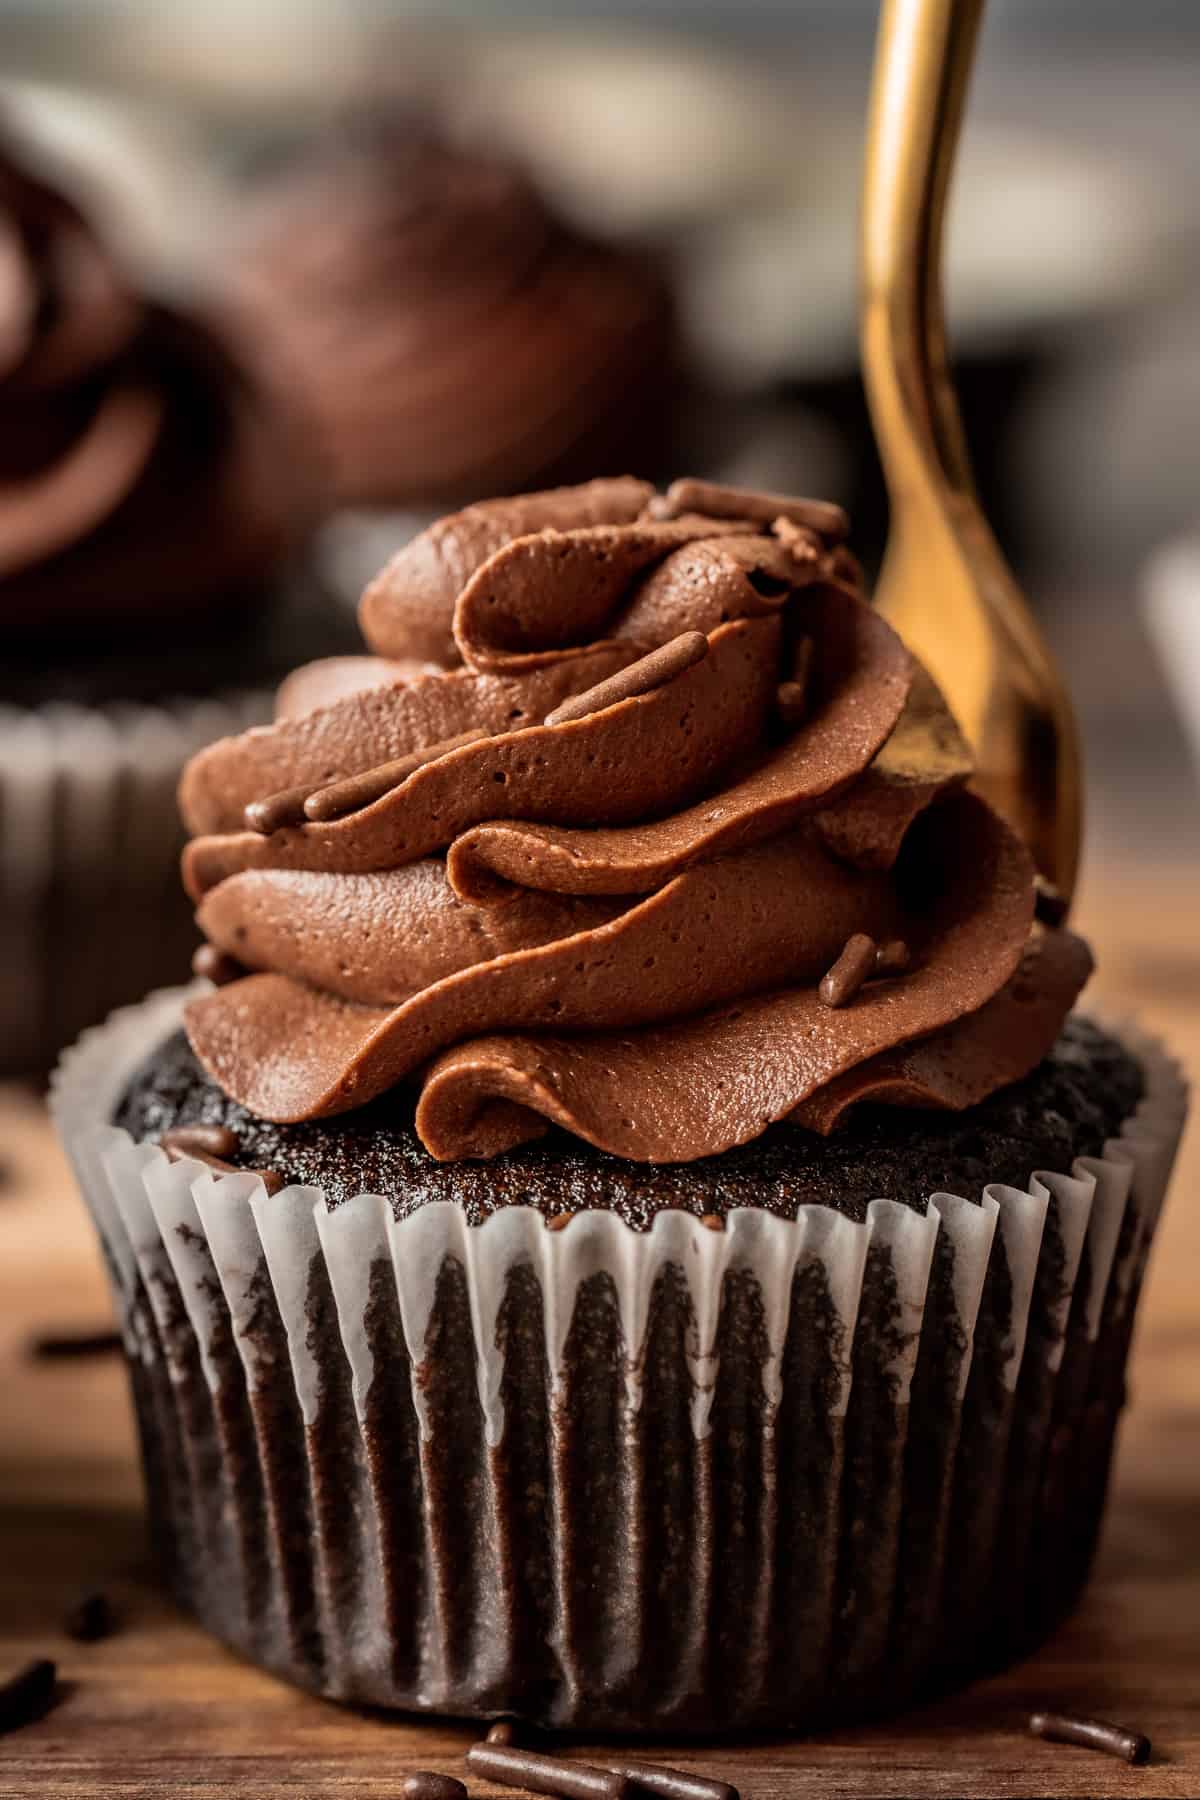 A close up photo of a chocolate cupcake with chocolate buttercream swirl on a wood background.